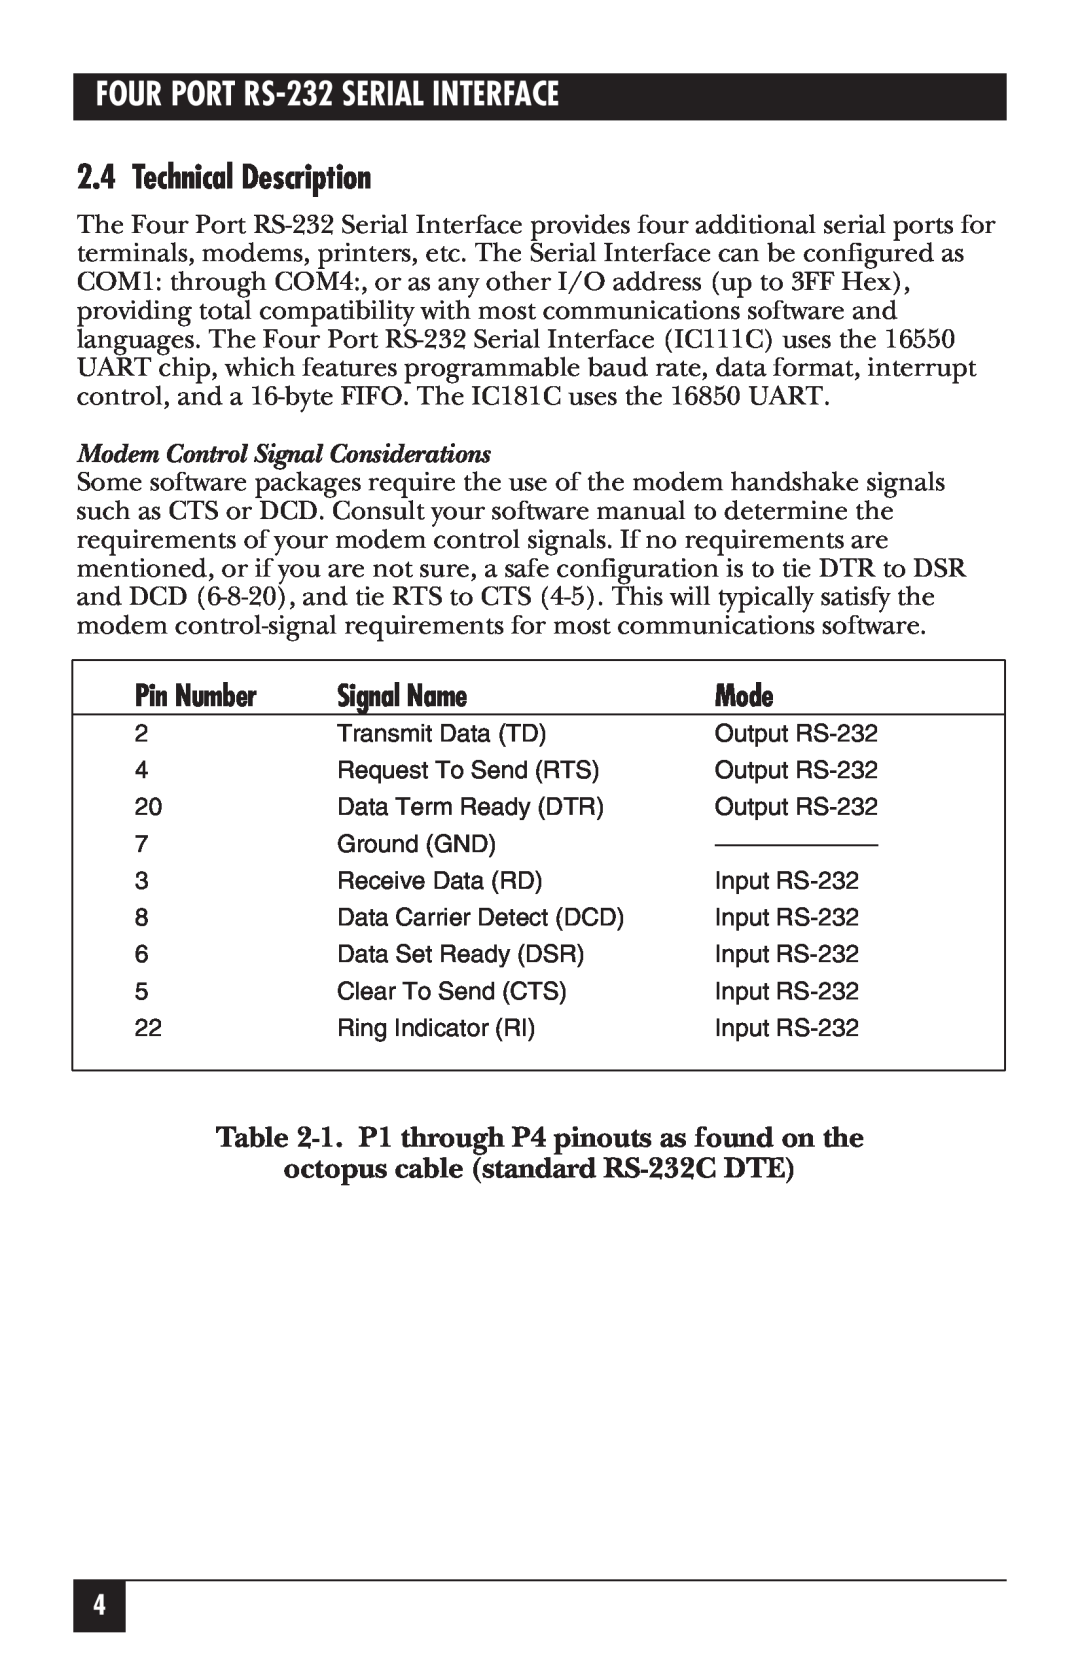 Black Box IC181C, RS-232 Technical Description, Pin Number, Signal Name, Mode, 1. P1 through P4 pinouts as found on the 